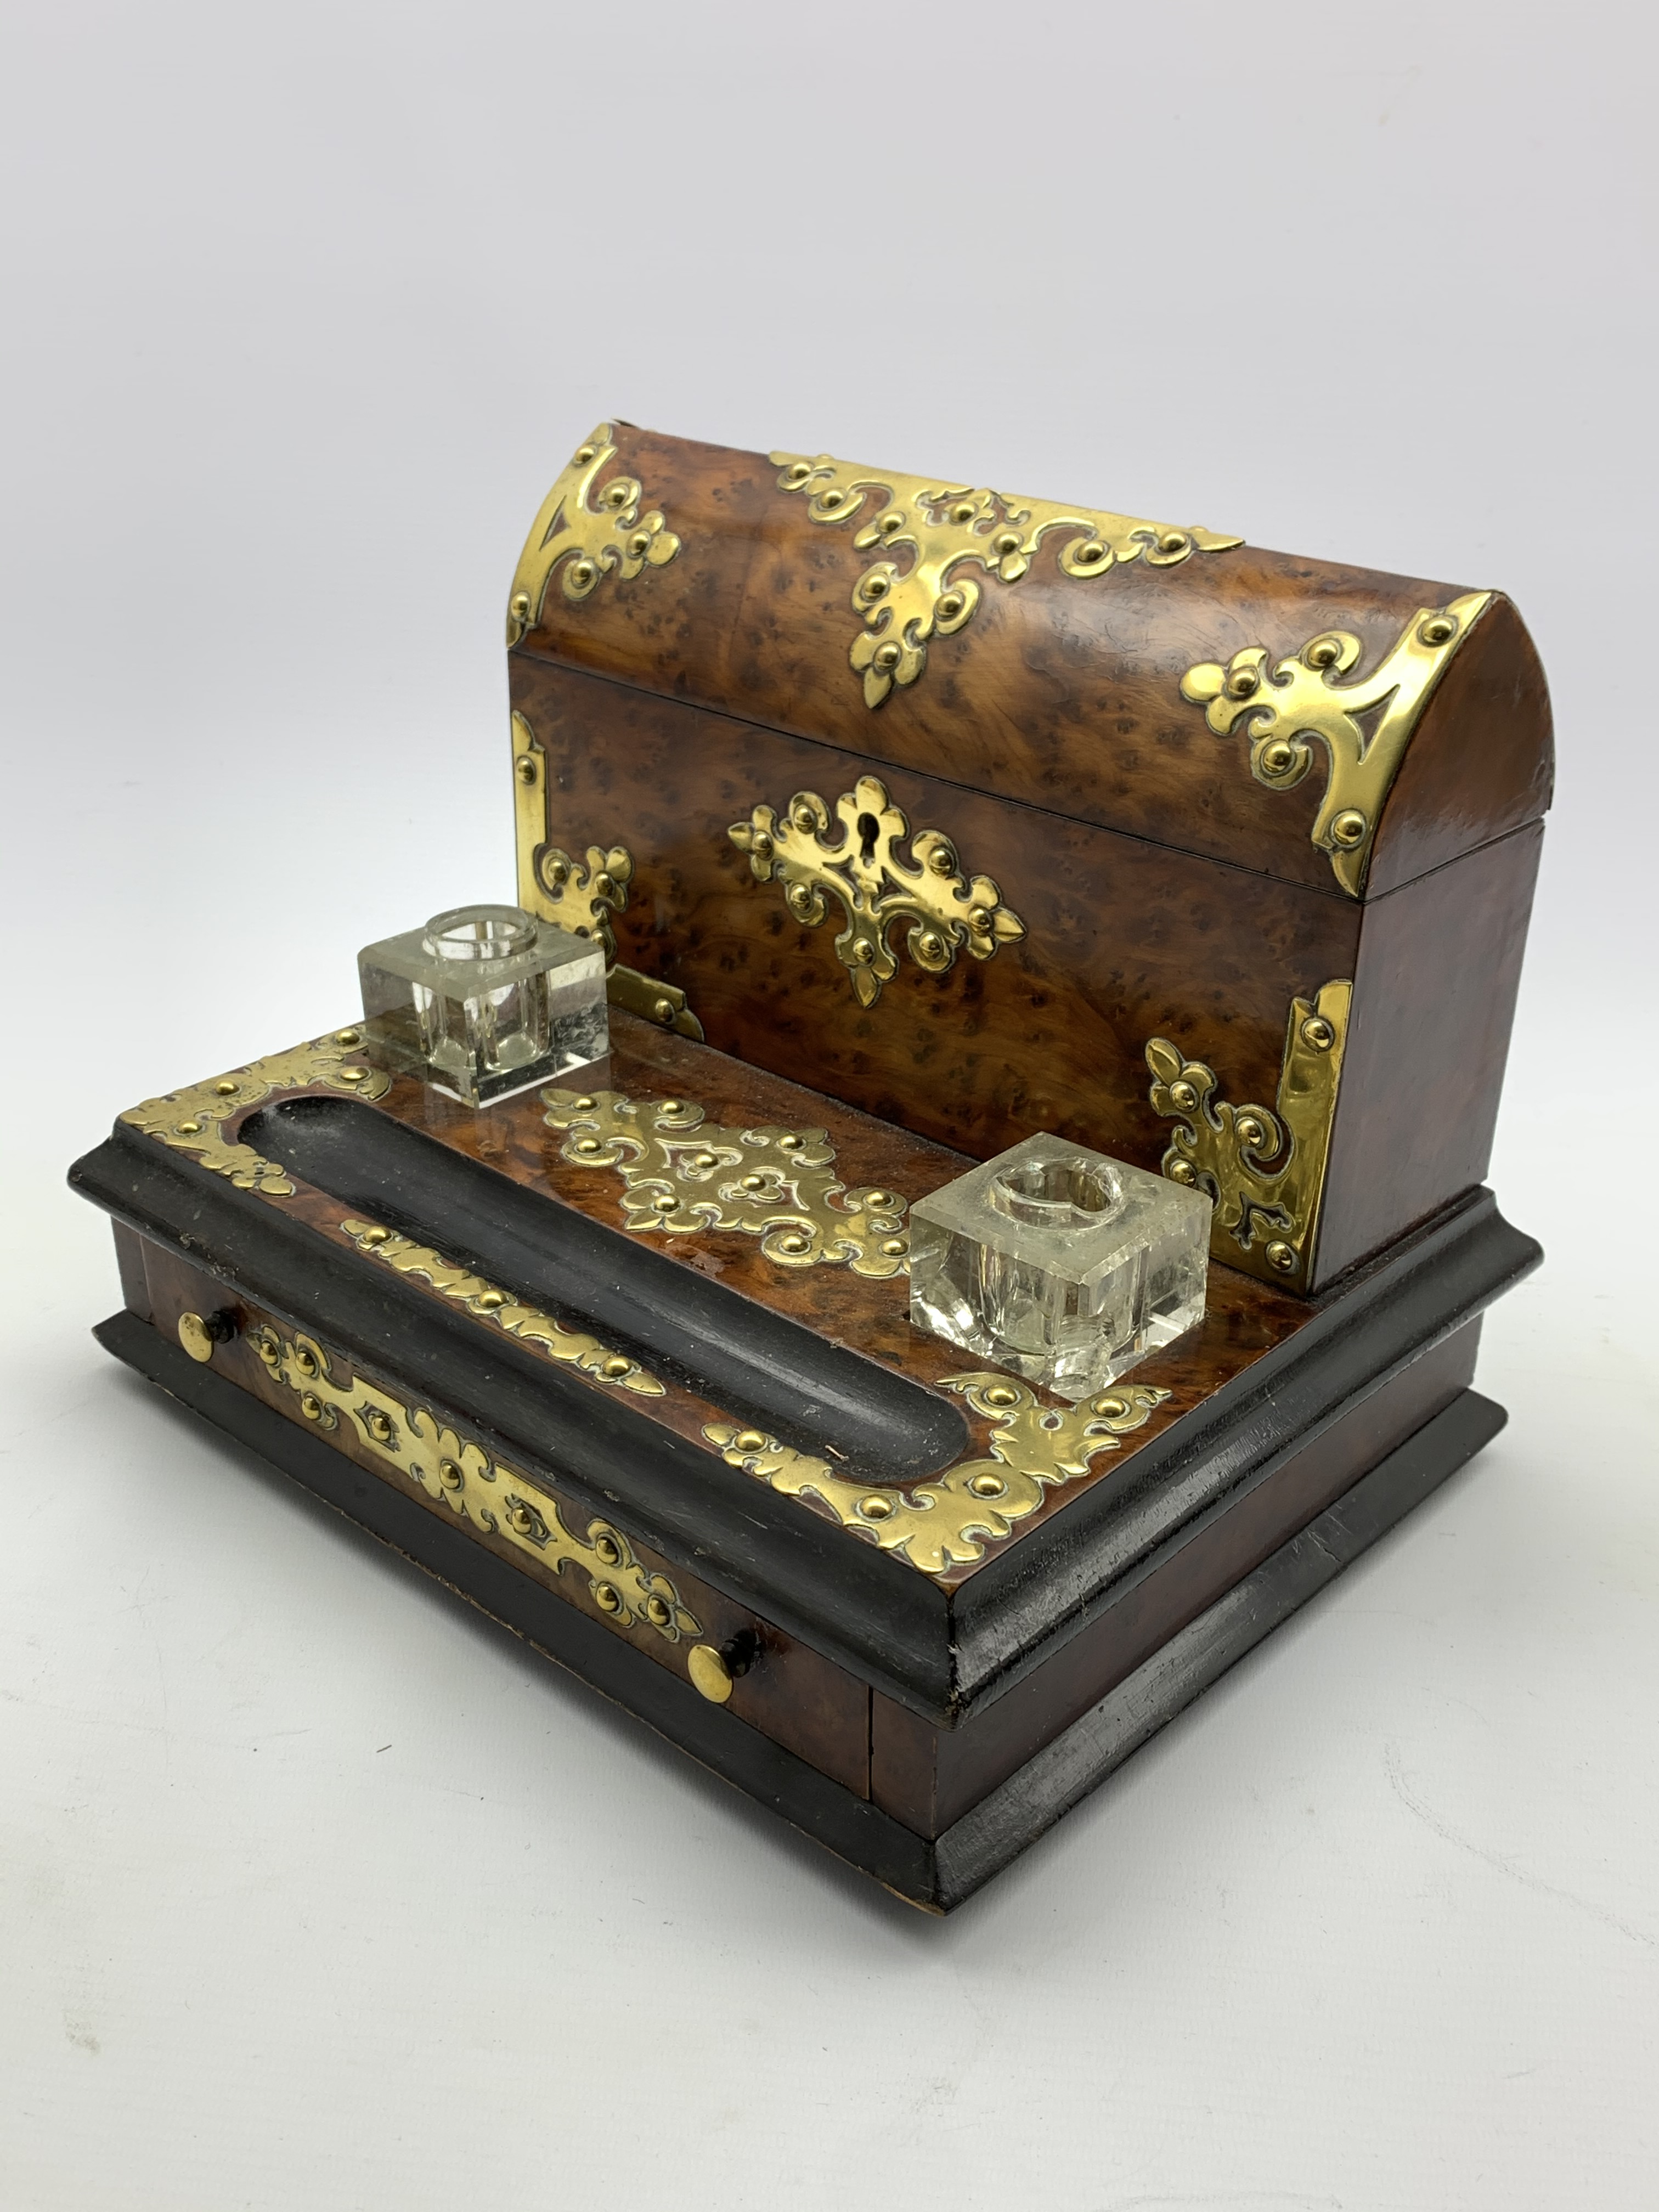 Victorian birds eye maple inkstand with applied brass mounts fitted with a domed stationery casket - Image 2 of 3